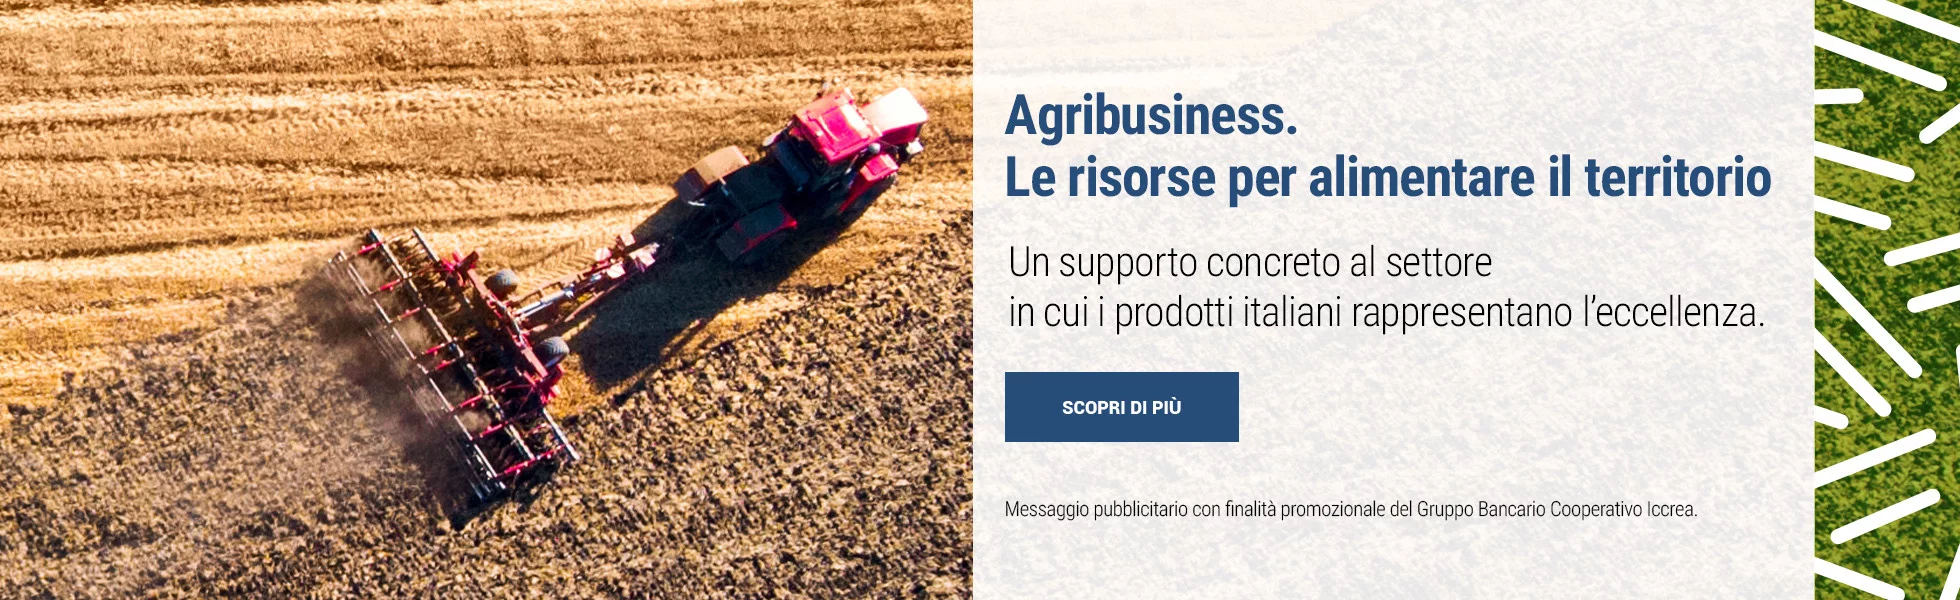 Agribusiness mobile